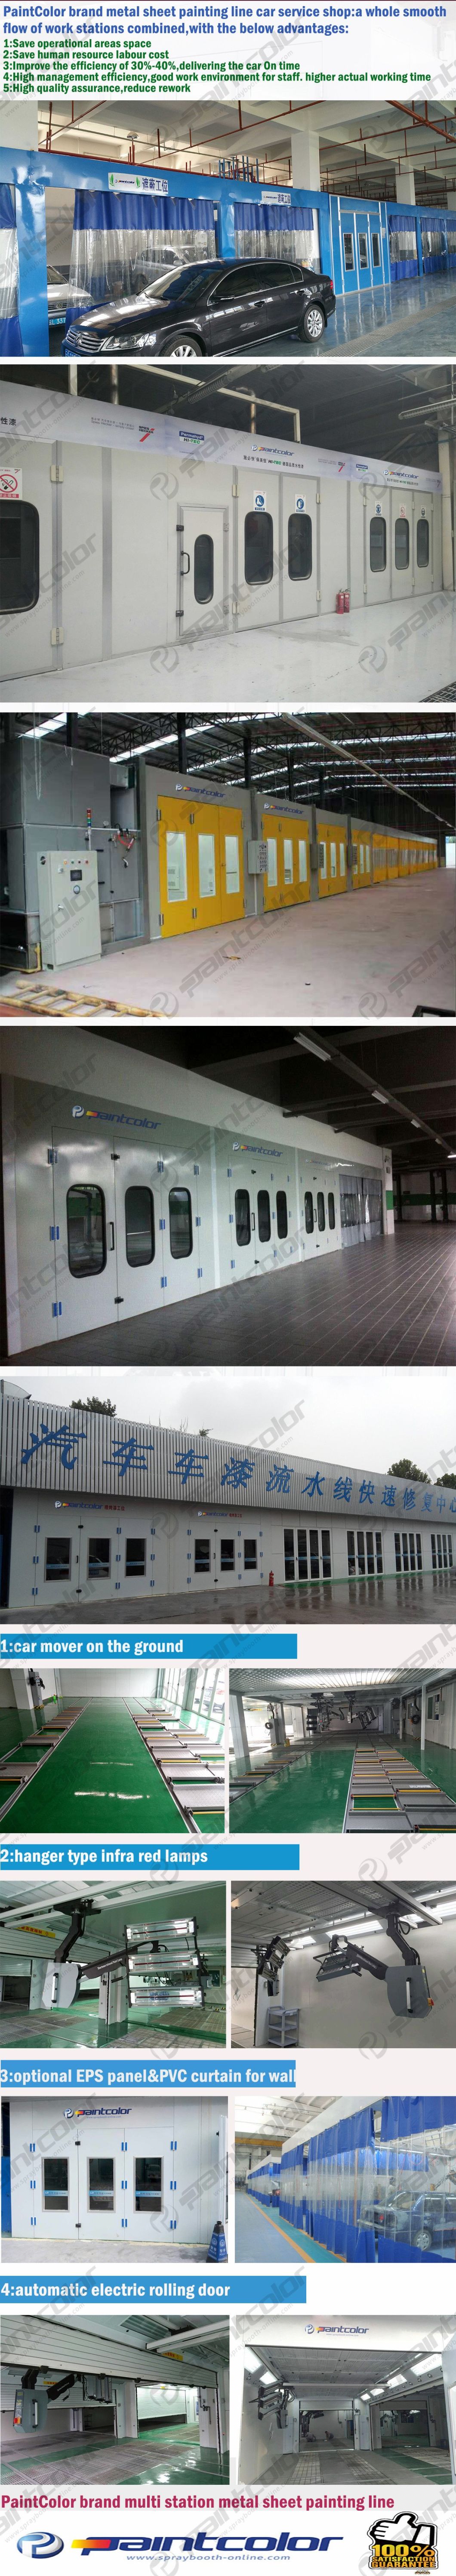 Painting Booth Compliant with Safety Regulations Automobile Car Paint Booth Price and Spray Baking Oven Paintcolor Brand